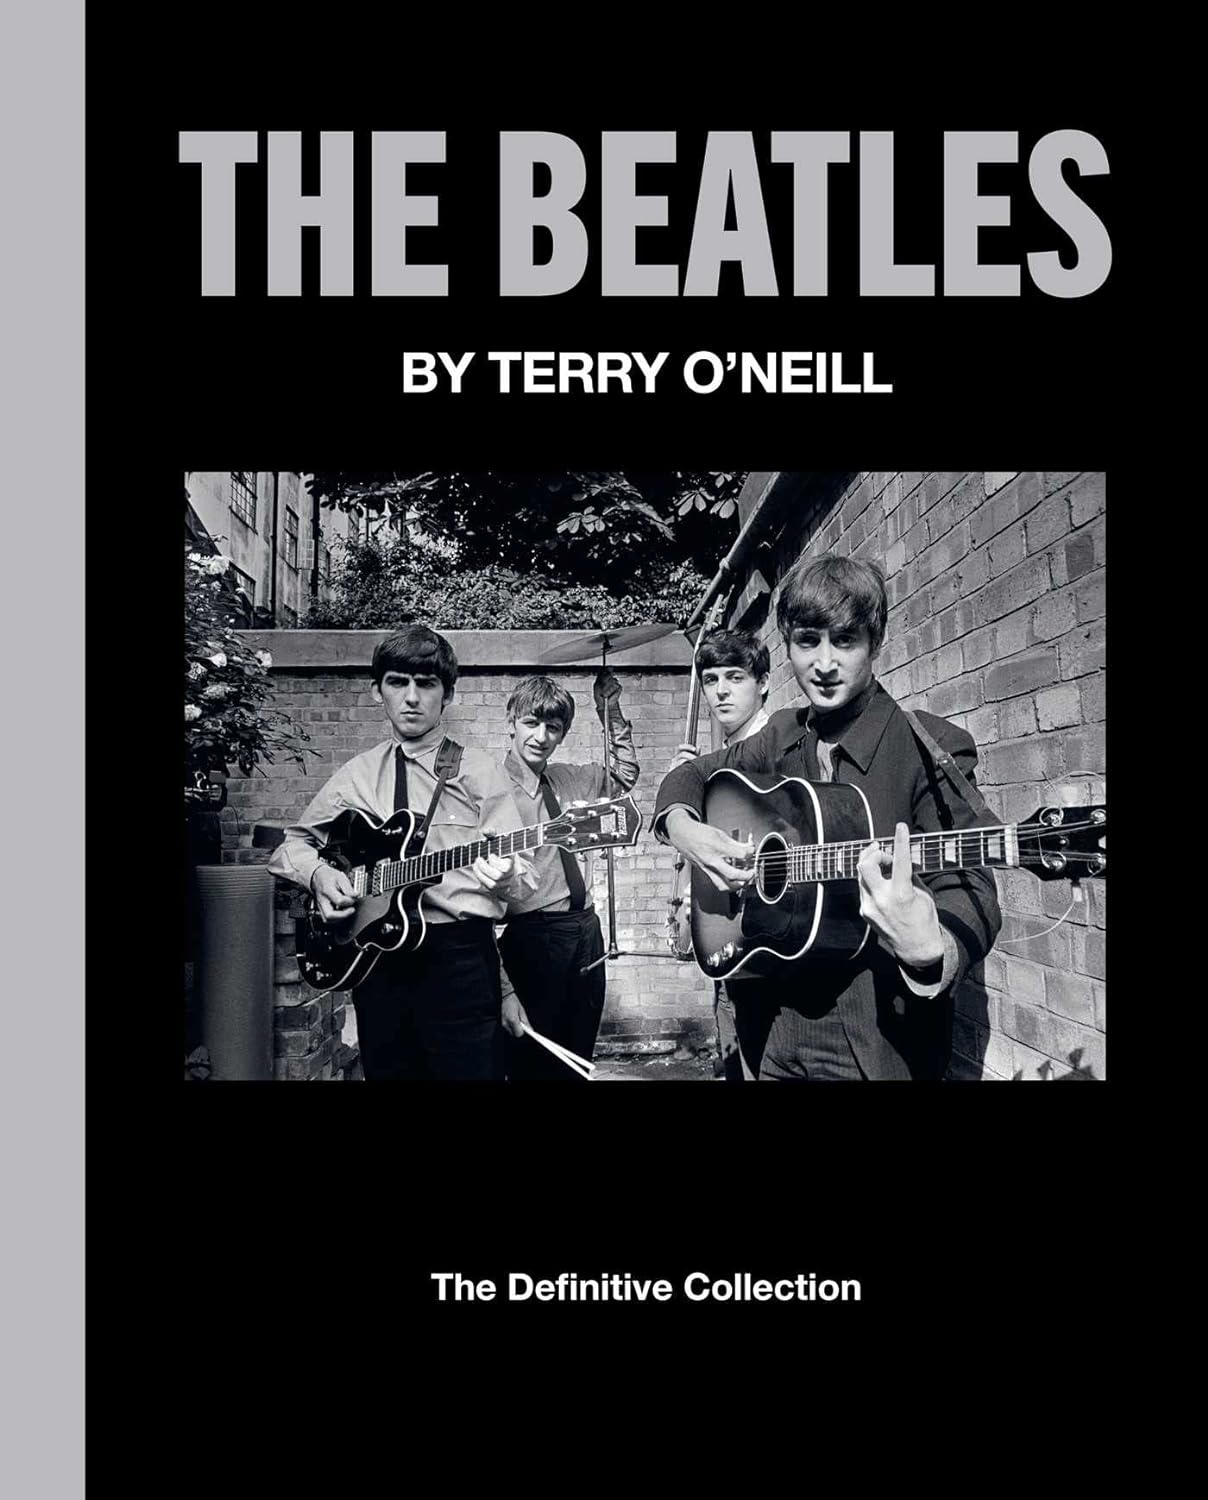 The Beatles by Terry O'Neall